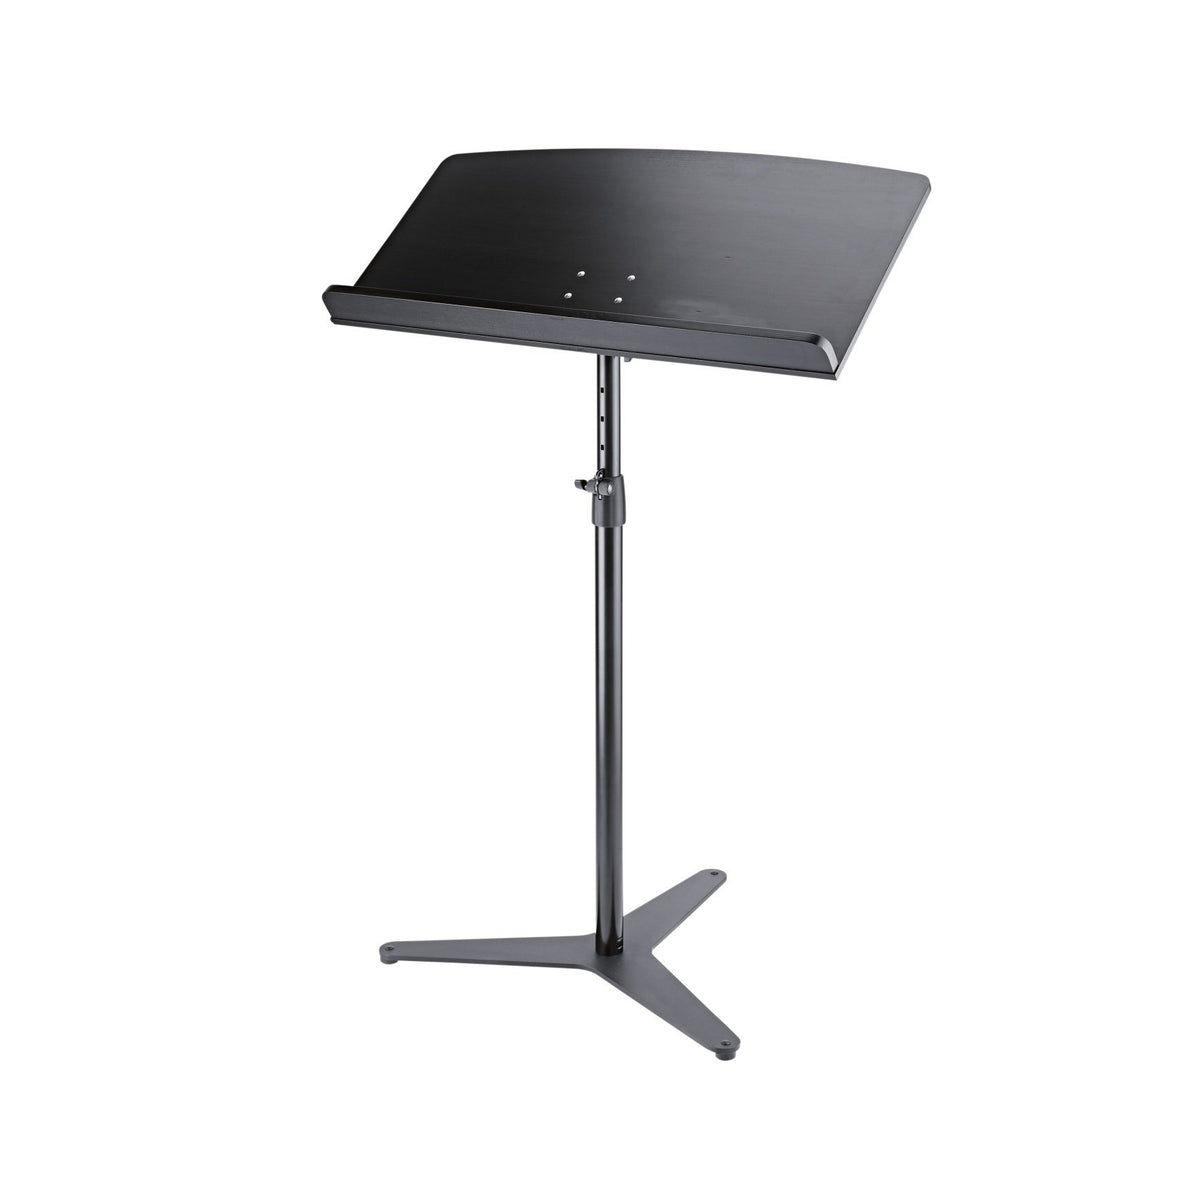 KÃ¶nig &amp; Meyer - 12333 Orchestra Conductor Stand Desks-Music Stand-KÃ¶nig &amp; Meyer-Music Elements